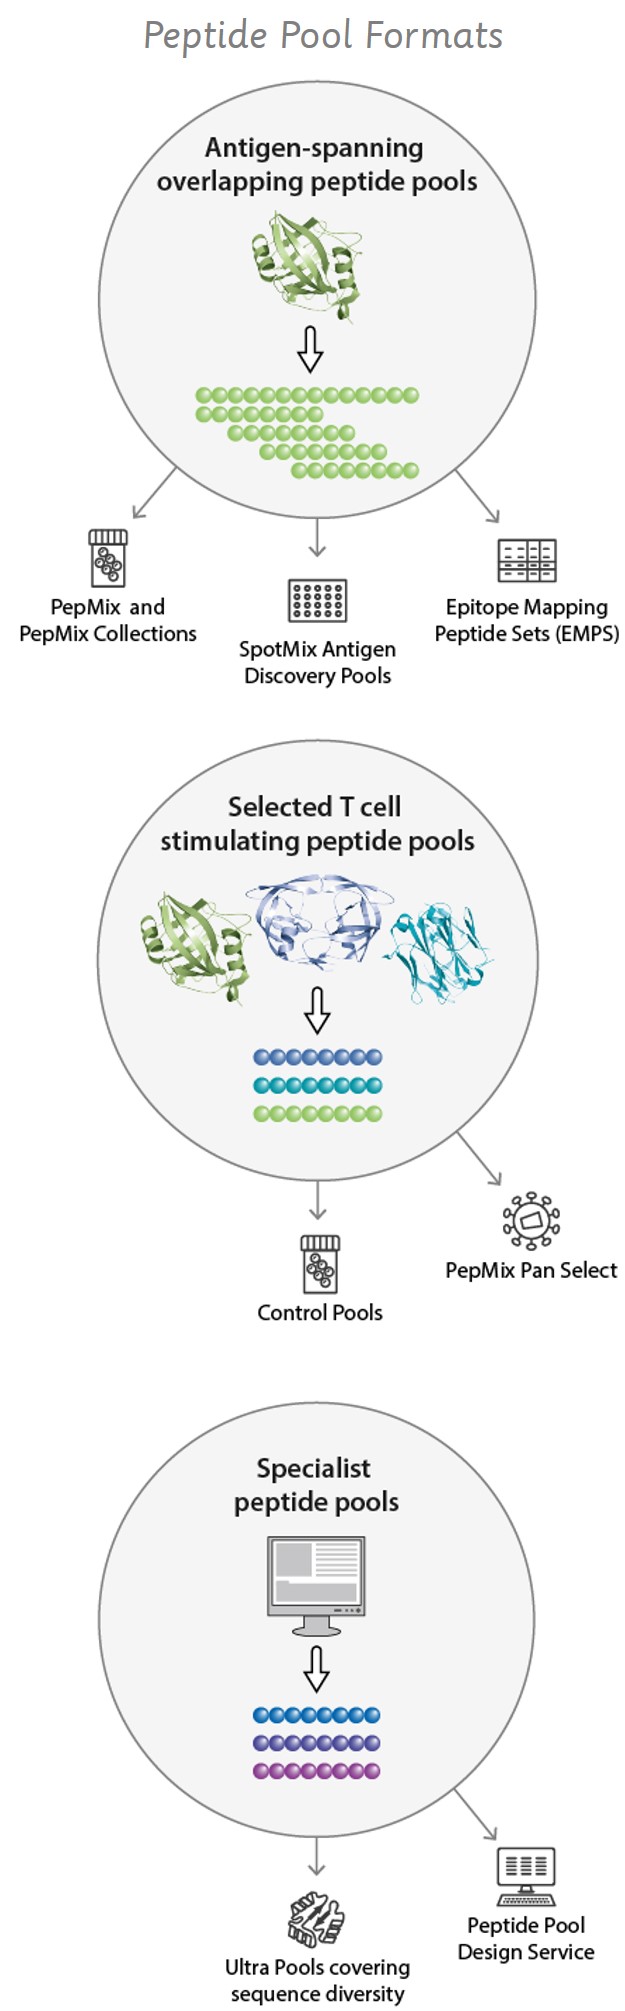 Overview of JPT's different PepMix Peptide Pool Layouts, e.g. Ultra Pool, Infectious Disease Pools, Control Pools etc.